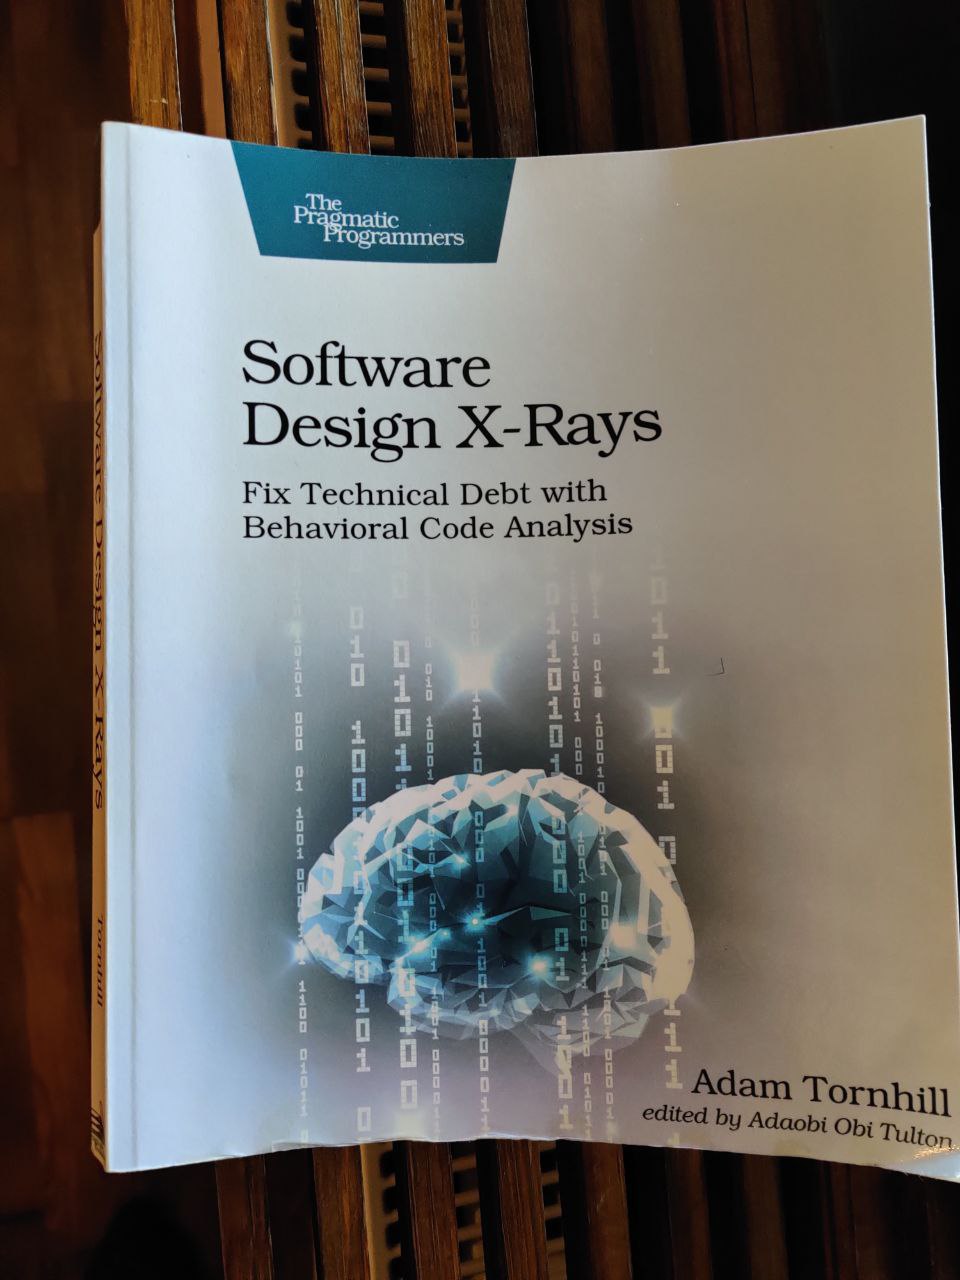 “Software Design X-Rays” cover